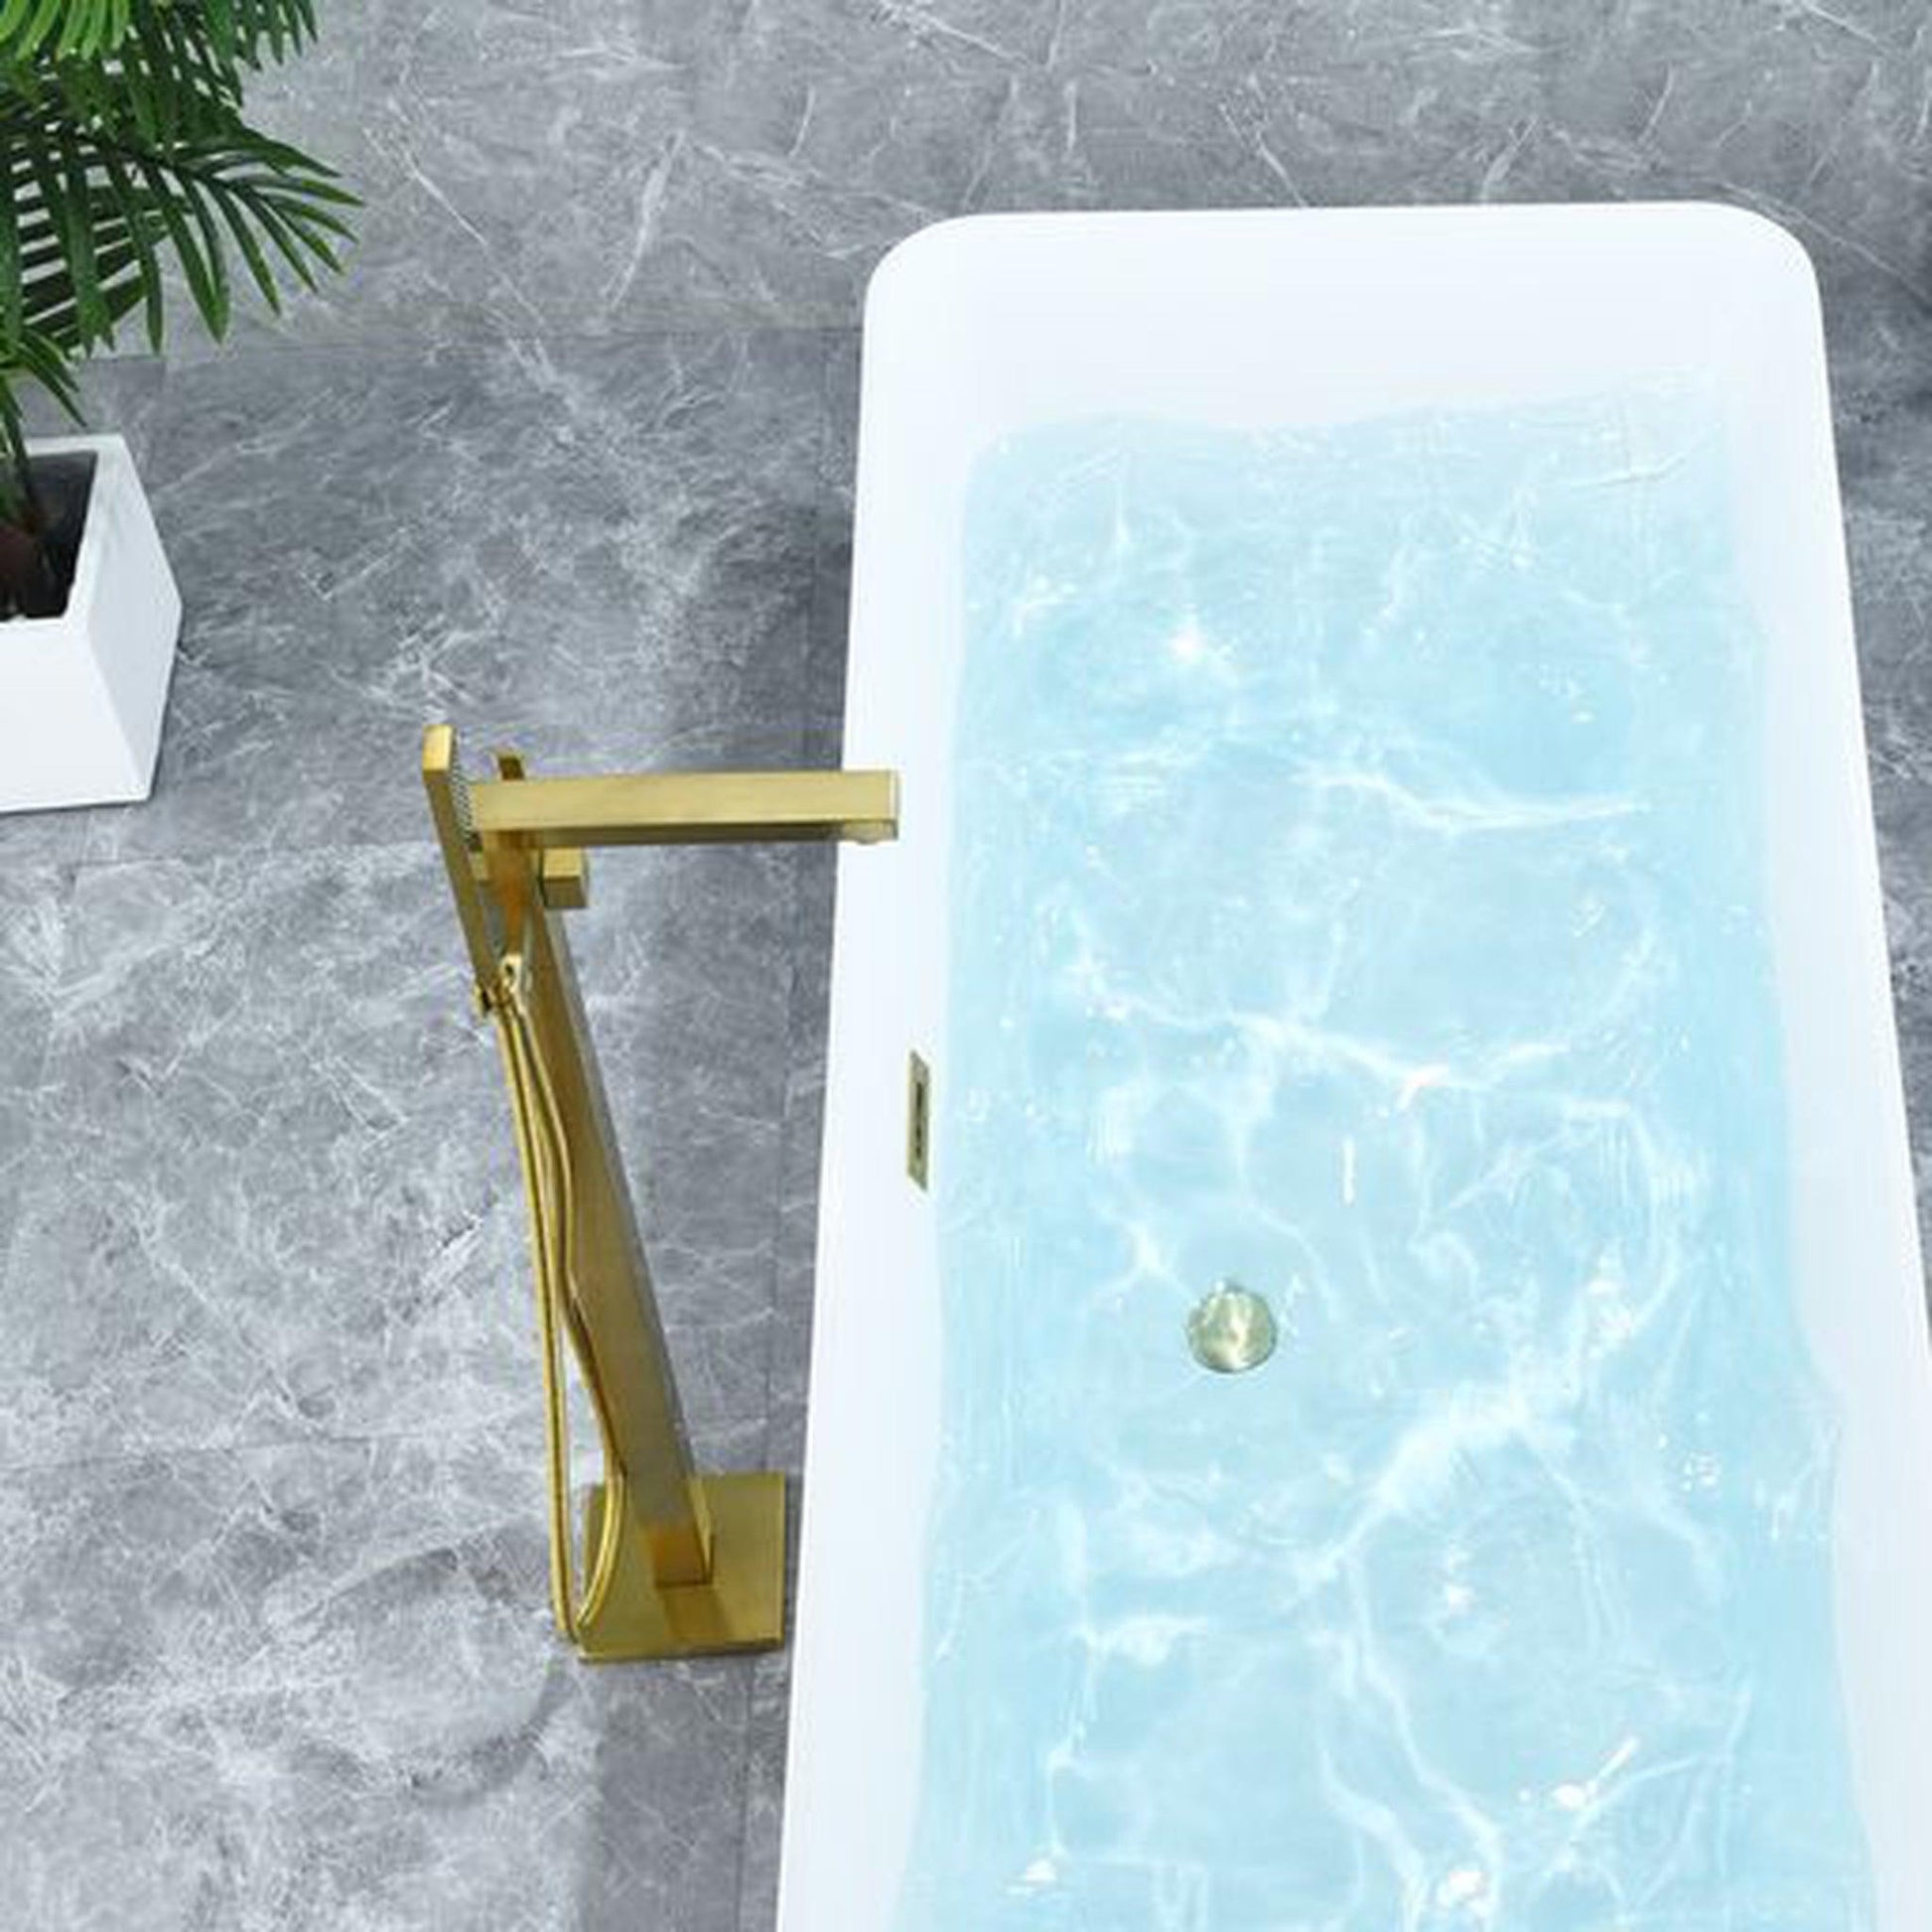 Altair Campia Brushed Gold Single Lever Handle Freestanding Bathtub Faucet With Handshower